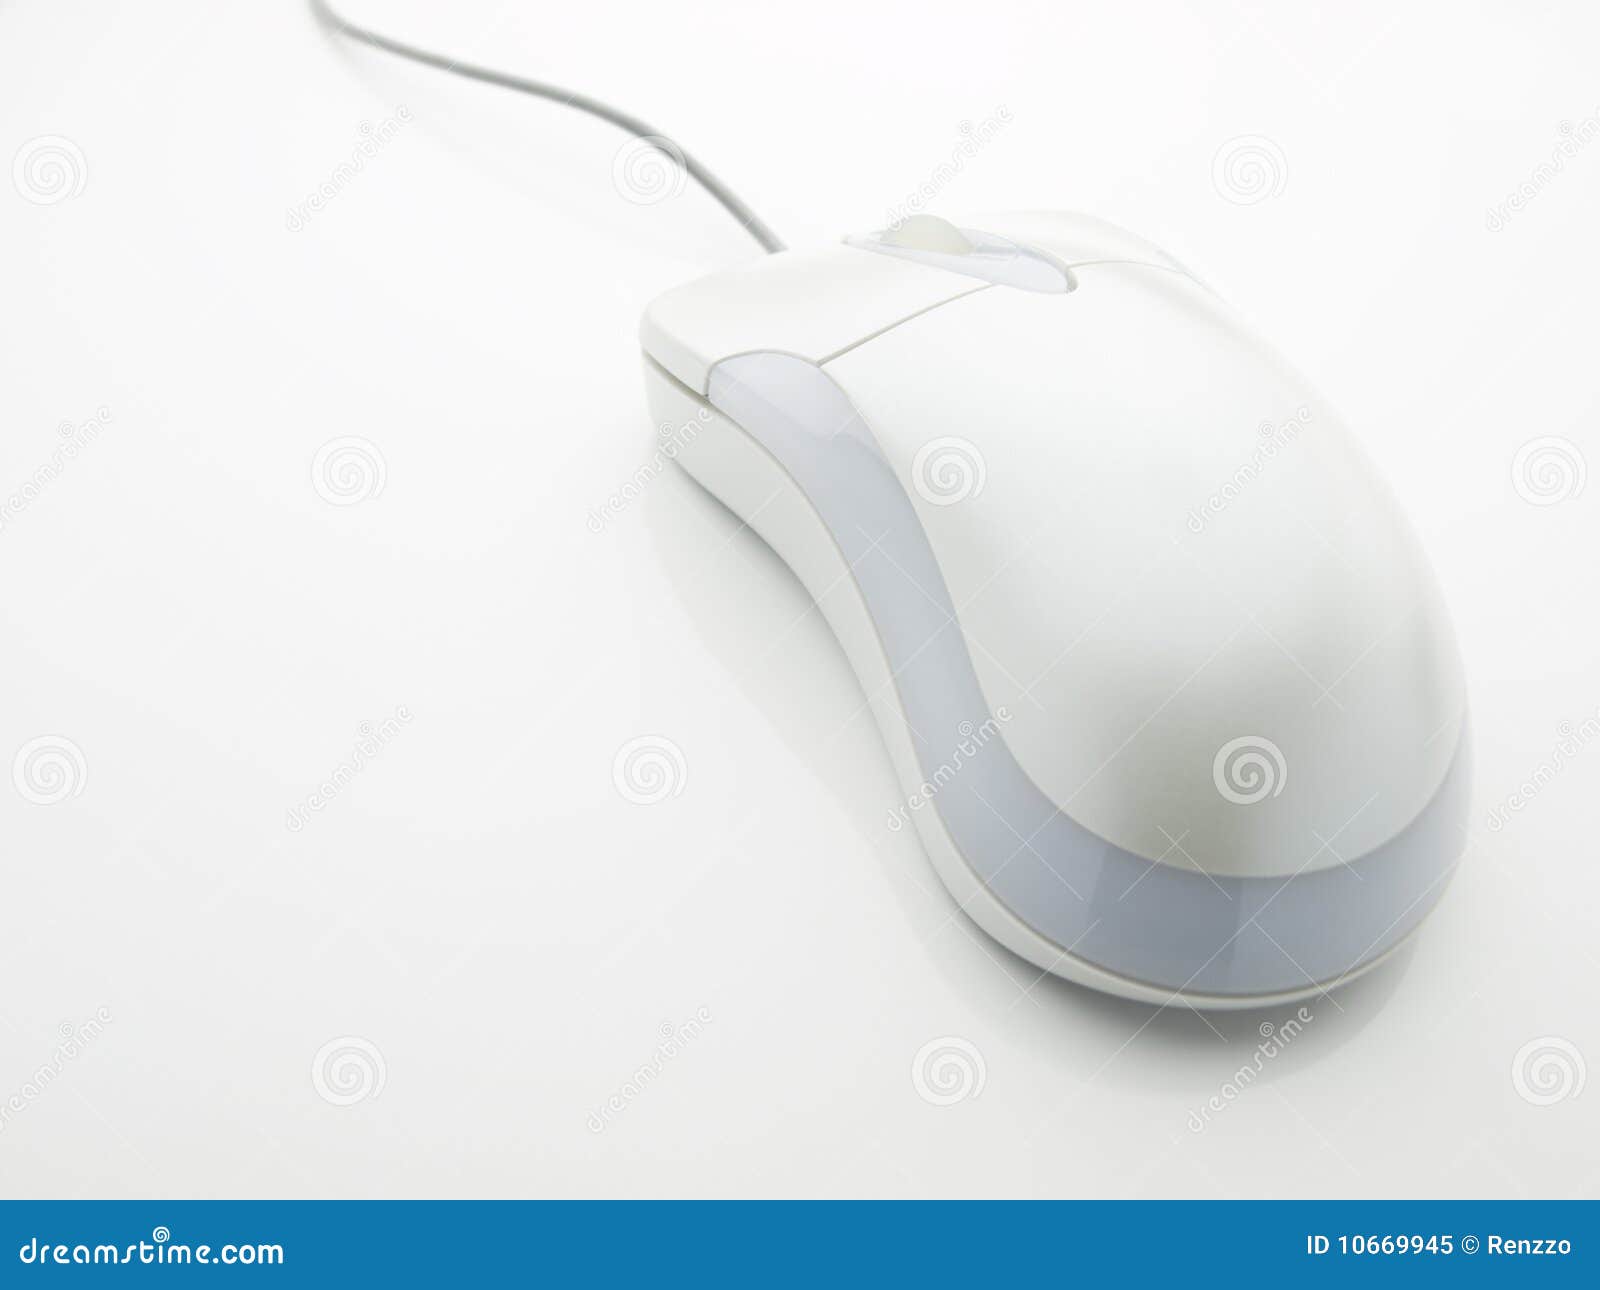 White Pc Mouse On White Table Top Stock Image Image Of Accessories